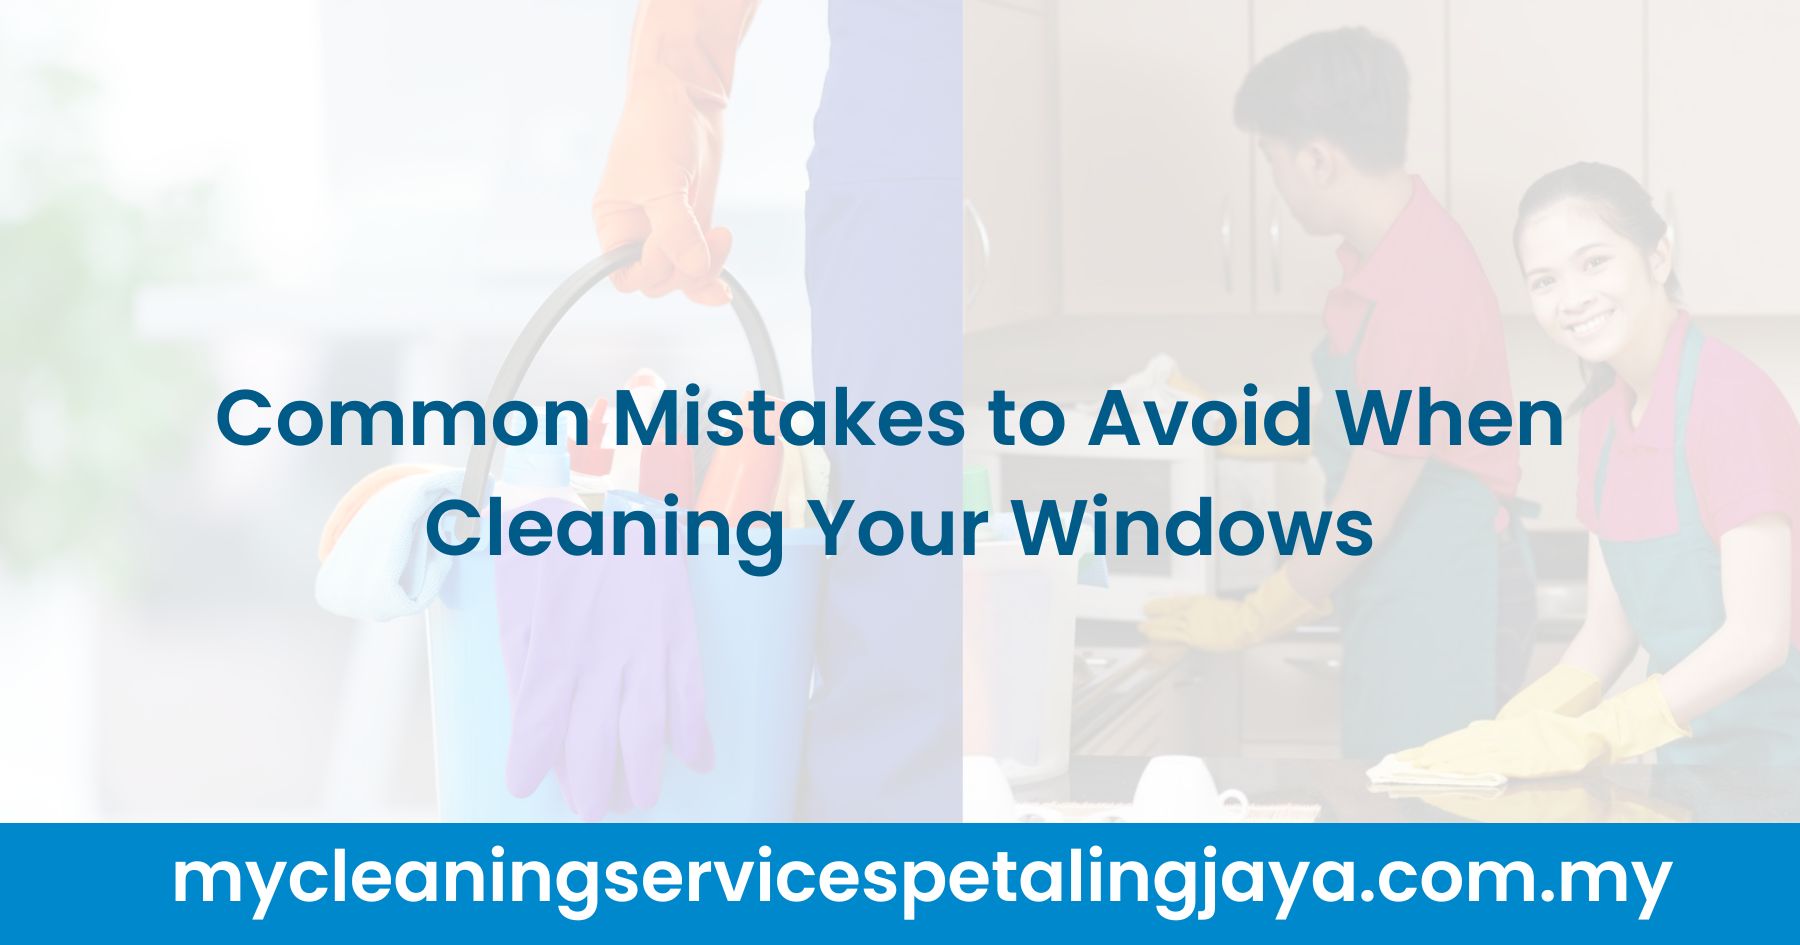 Common Mistakes to Avoid When Cleaning Your Windows